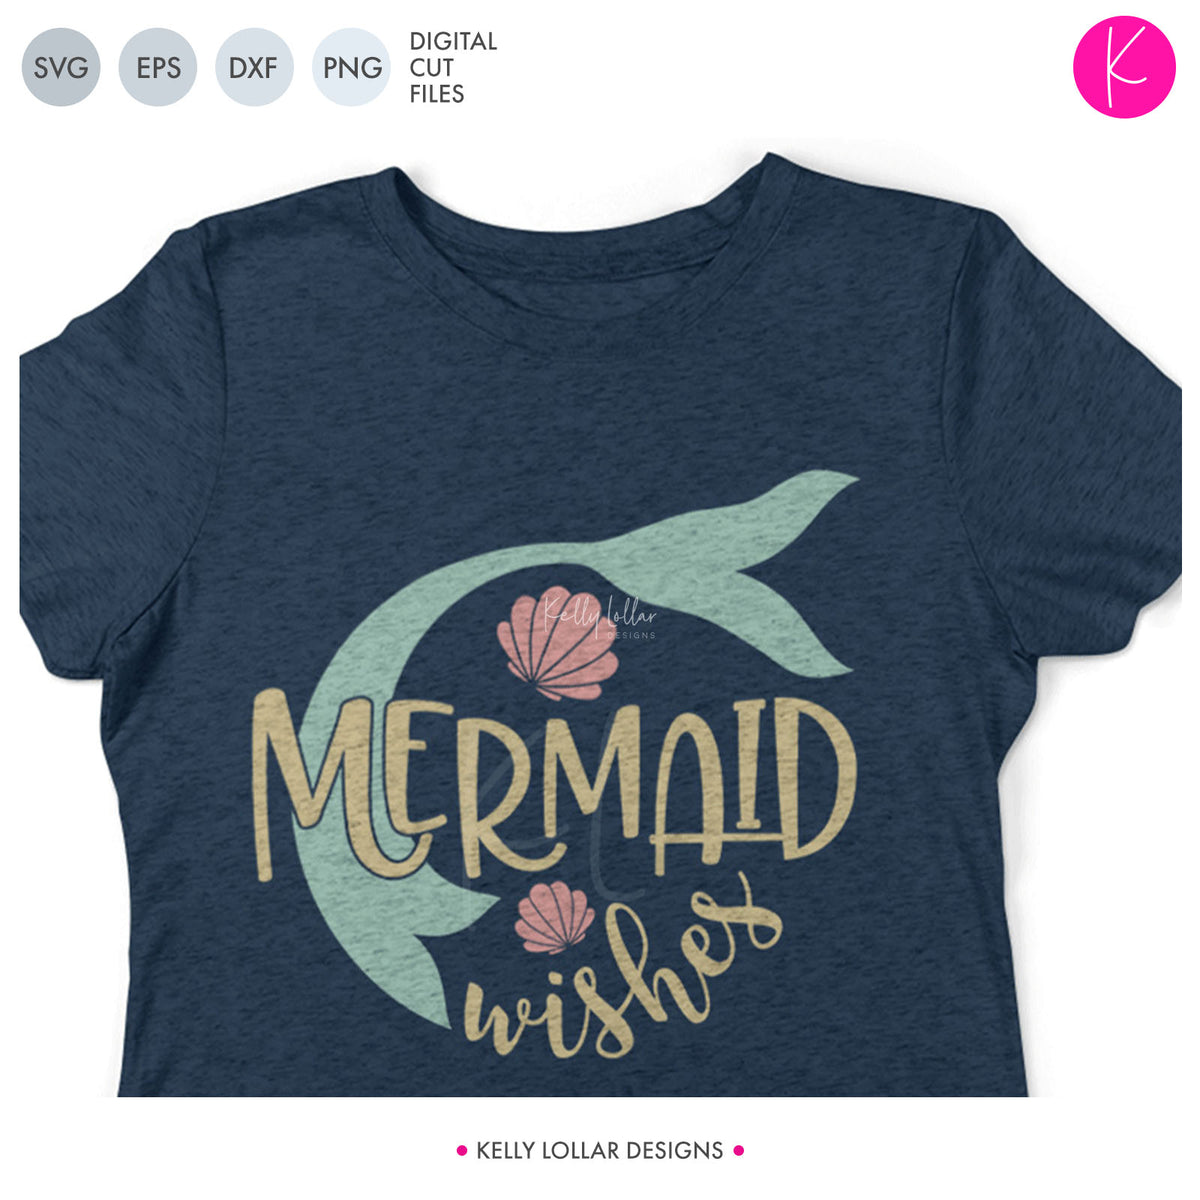 Mermaid Wishes | SVG DXF EPS PNG Cut Files